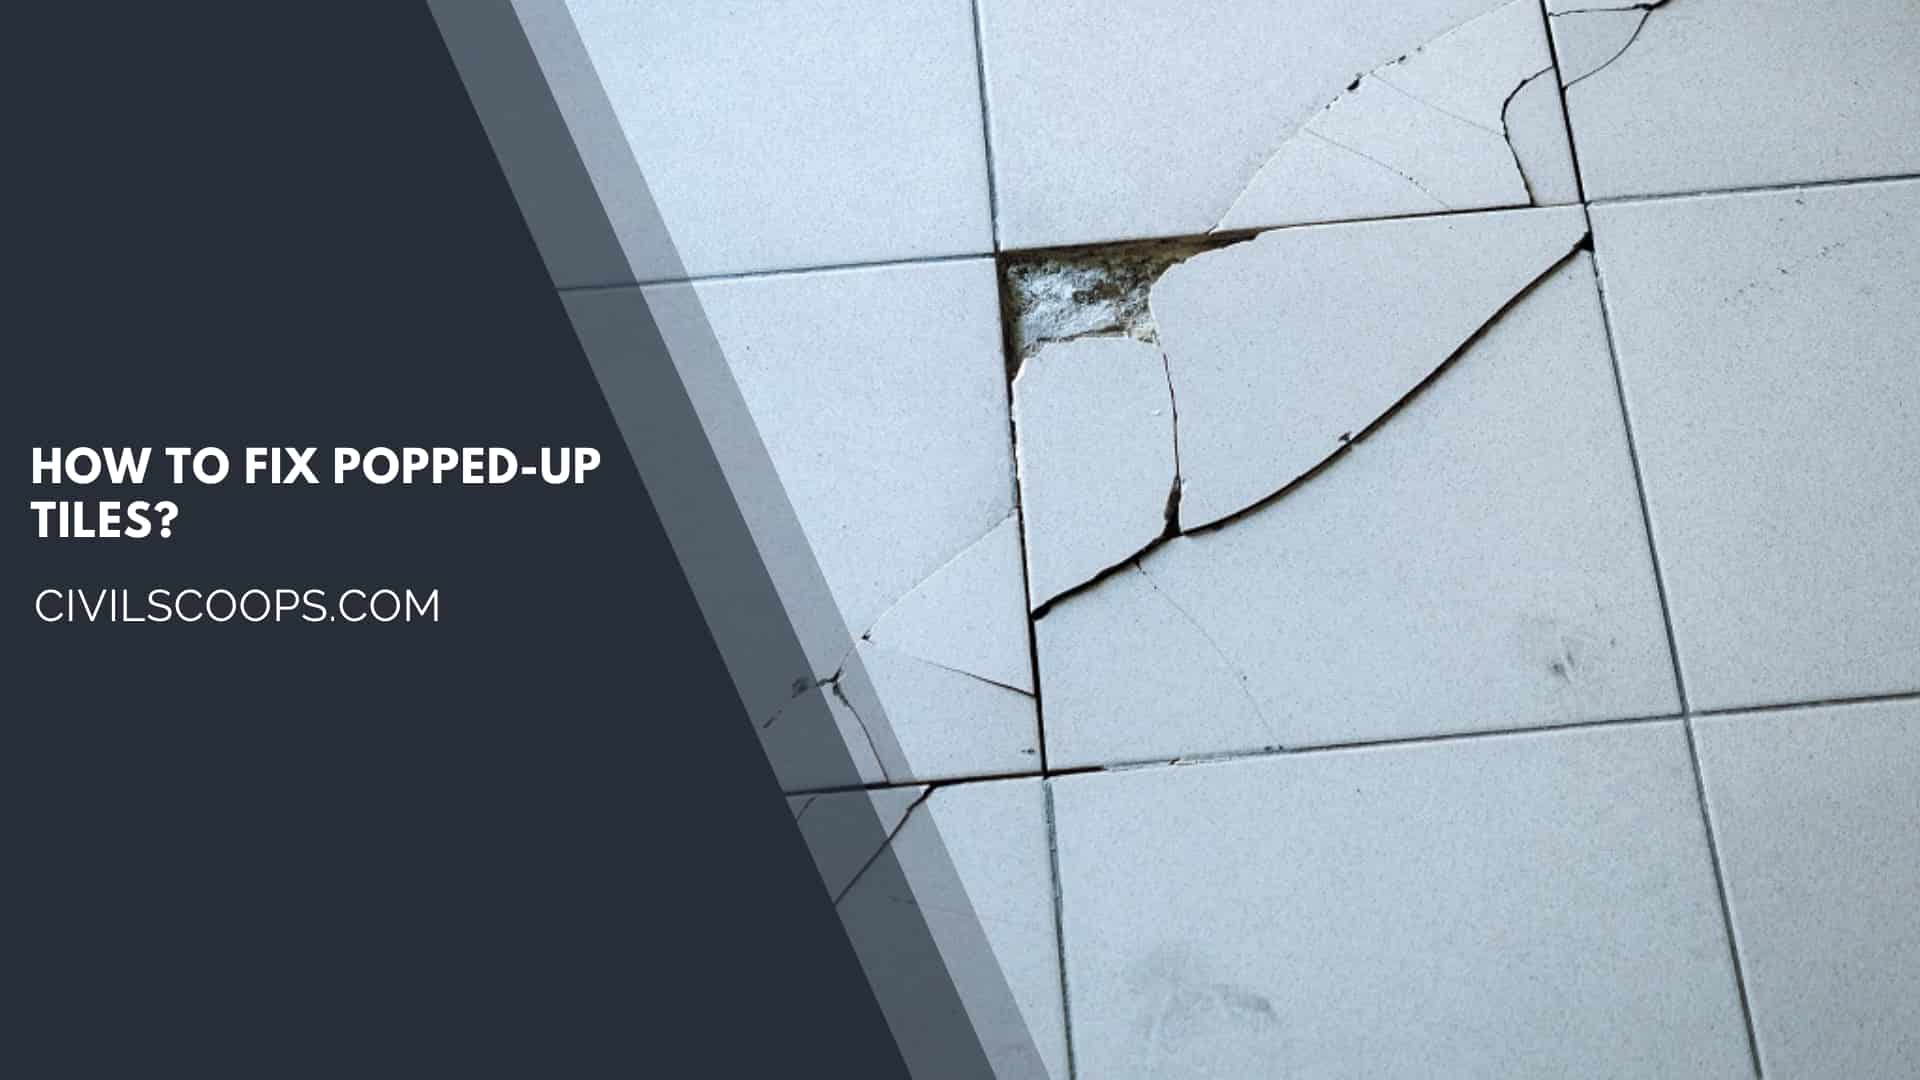 How to Fix Popped-Up Tiles